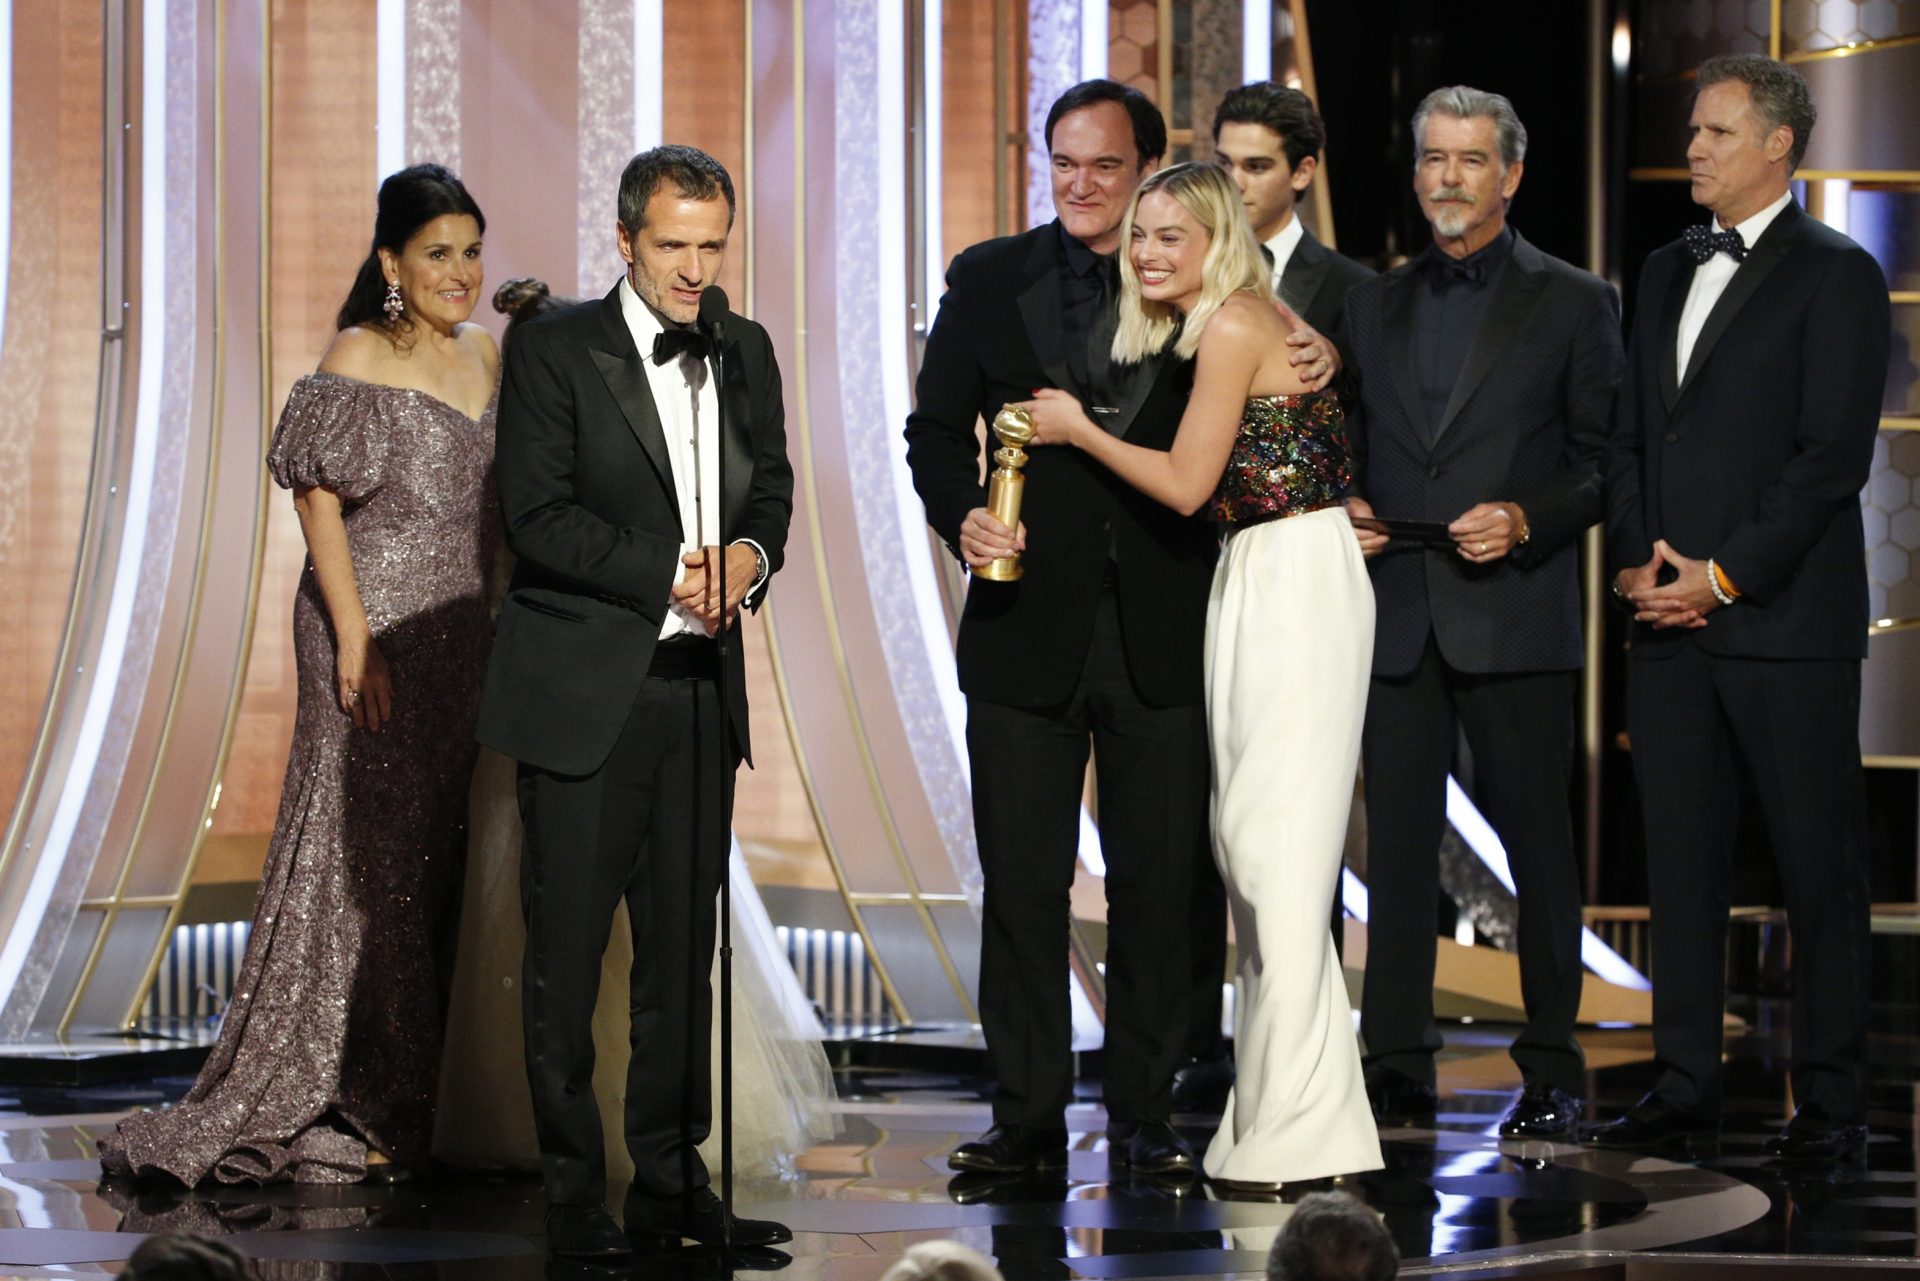 This image released by NBC shows Shannon McIntosh, from left, David Heyman, Quentin Tarantino and Margot Robbie accepting the award for best motion picture comedy for "Once Upon A Time...In Hollywood" at the 77th Annual Golden Globe Awards at the Beverly Hilton Hotel in Beverly Hills, Calif., on Sunday, Jan. 5, 2020.